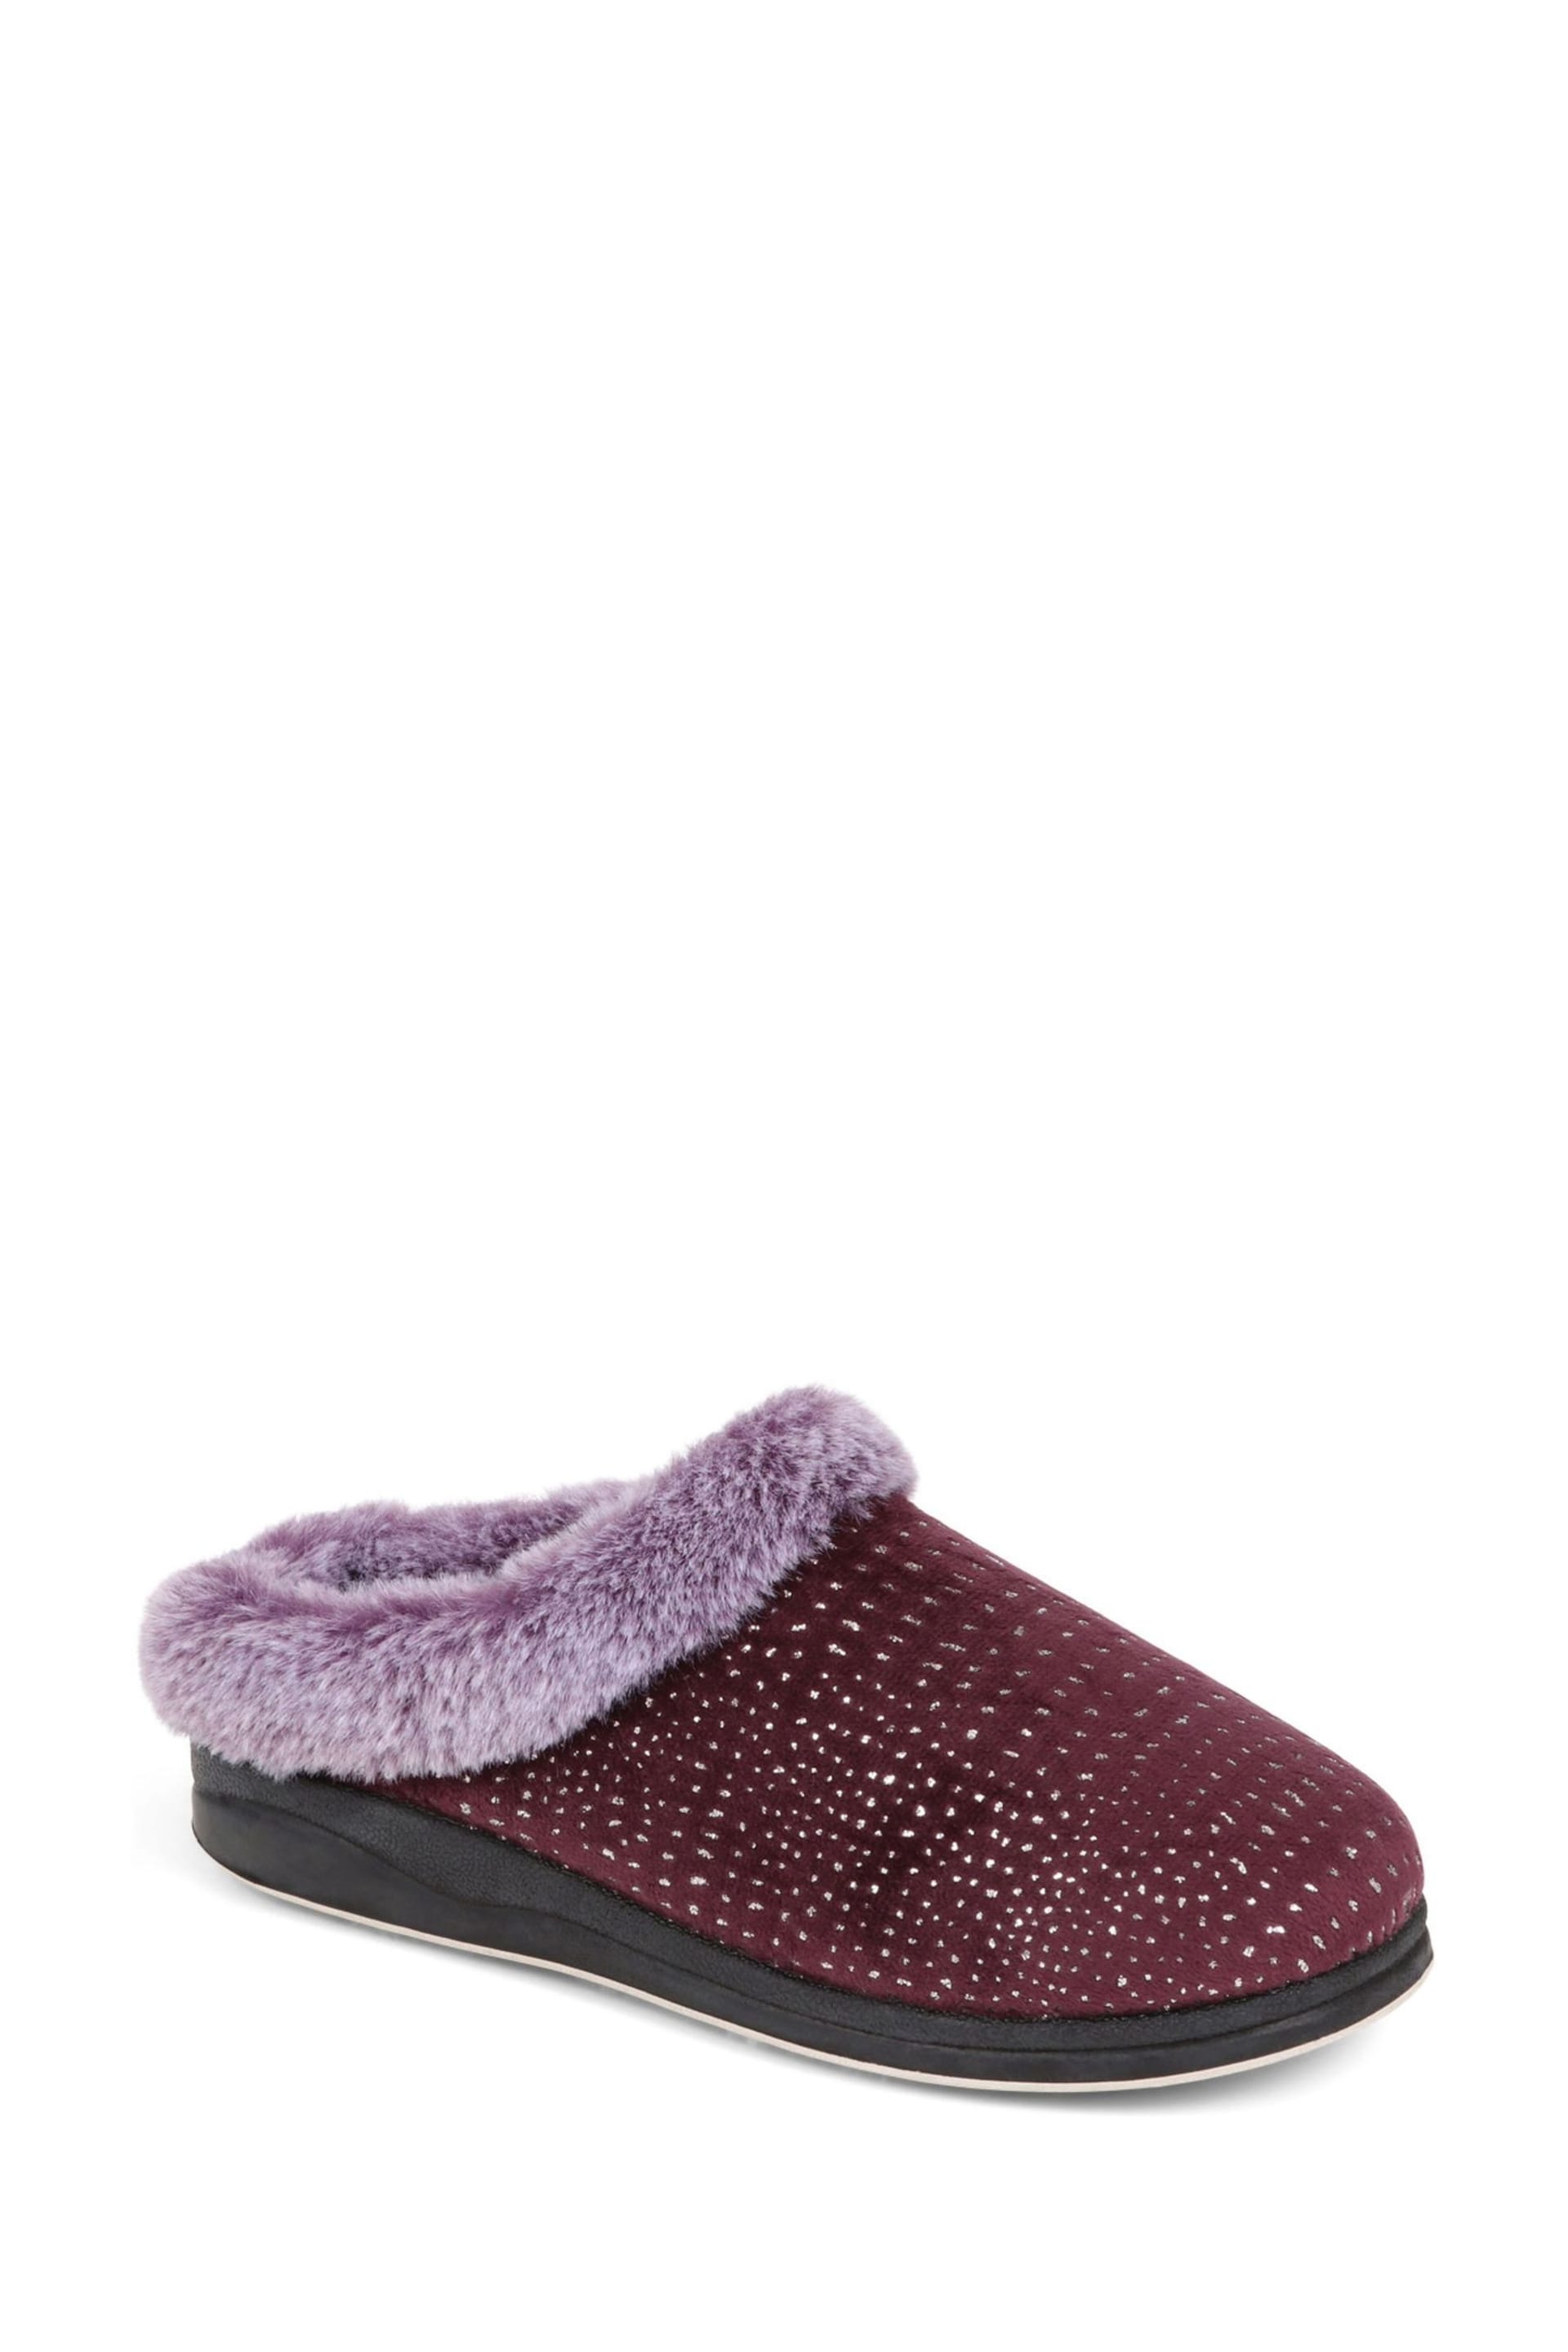 Pavers Purple Patterned Full Slippers - Image 2 of 5